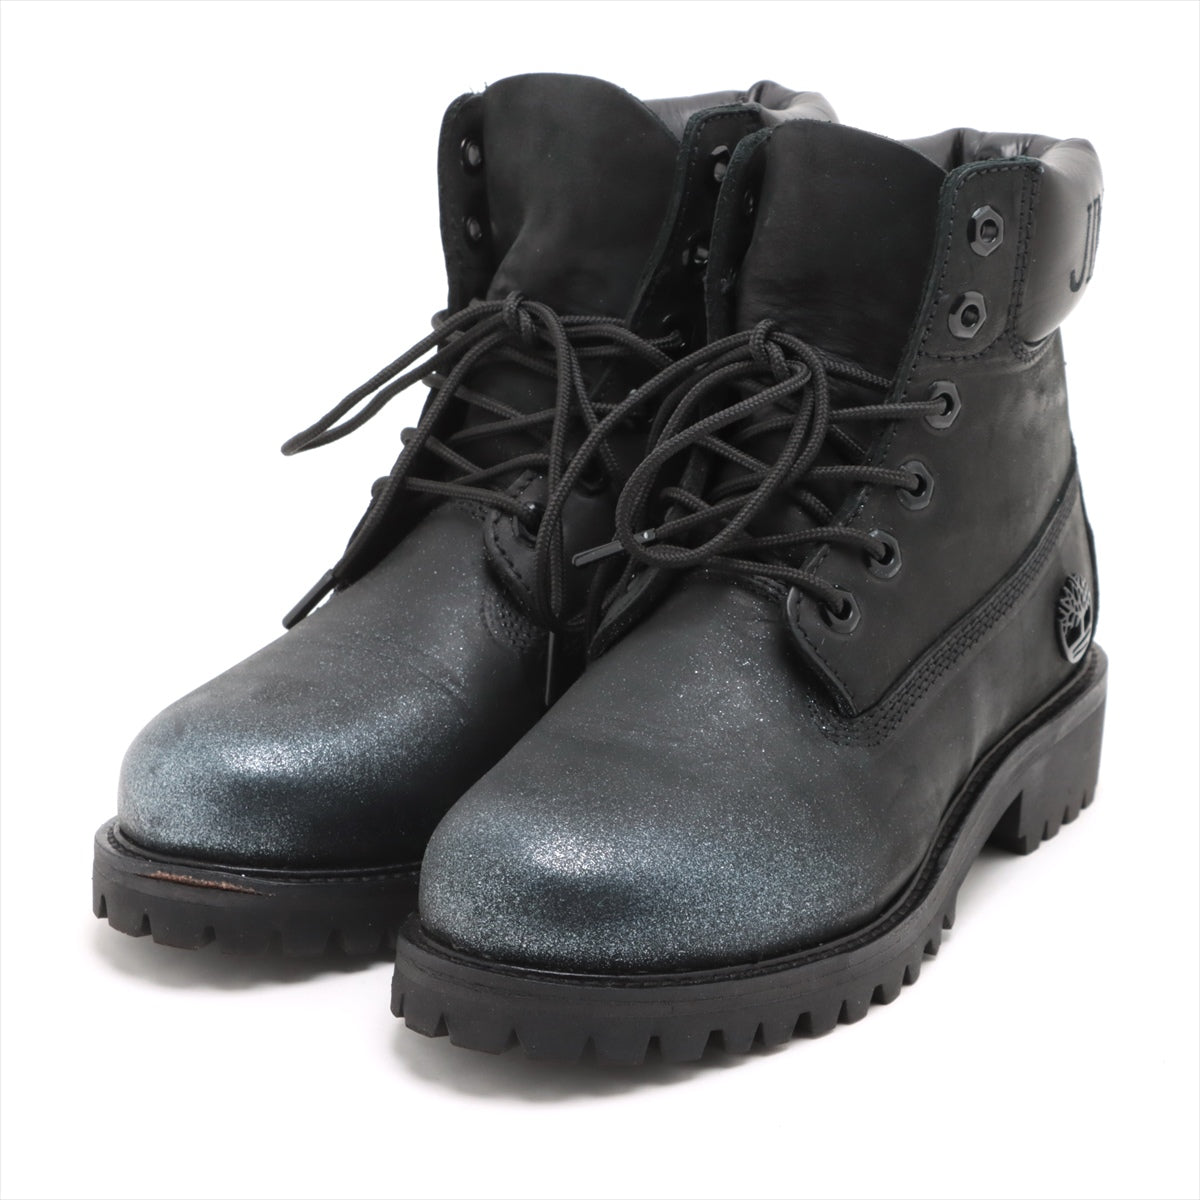 Jimmy Choo x Timberland Leather Short Boots 6 Ladies' Black premium high cut boots There is a box